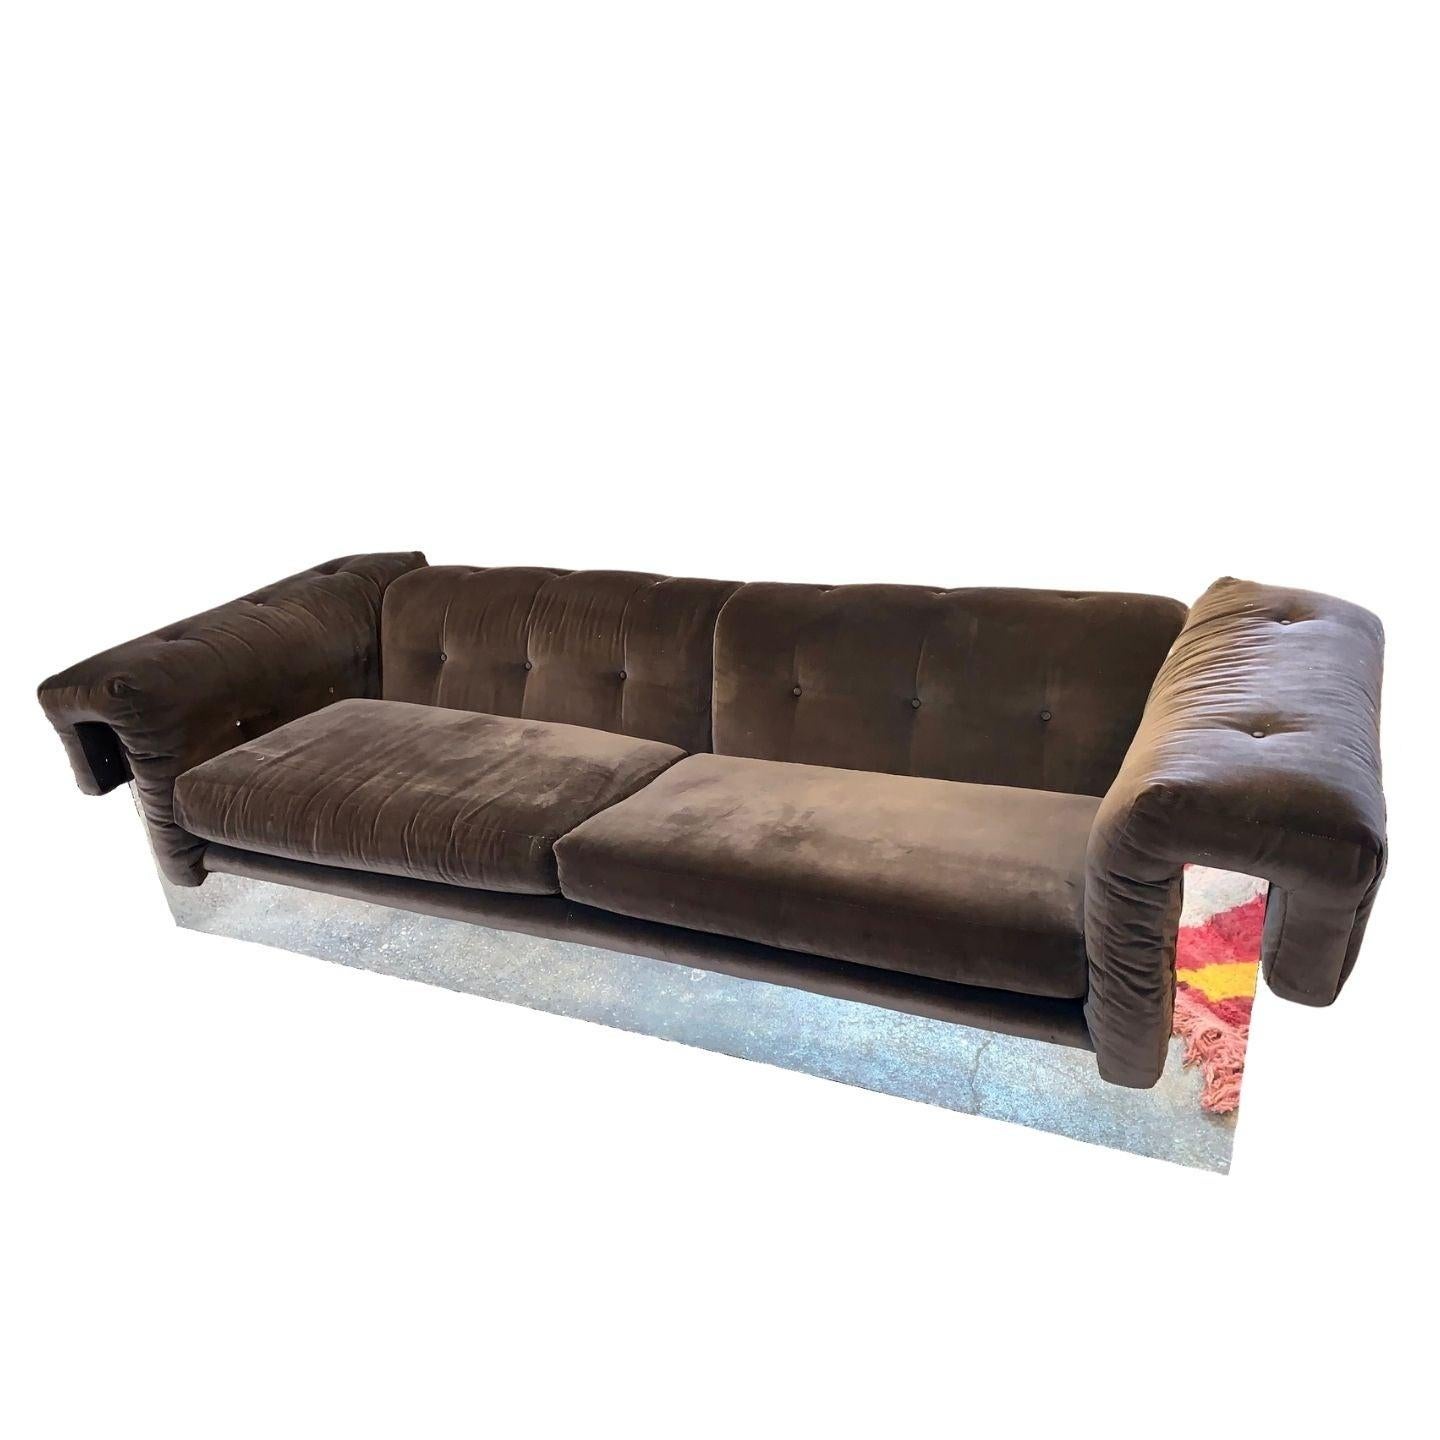 Beautiful Milo Baughman and Thayer Coggin brown velvet sofa with a mirrored chrome bottom that wraps around the entire couch.